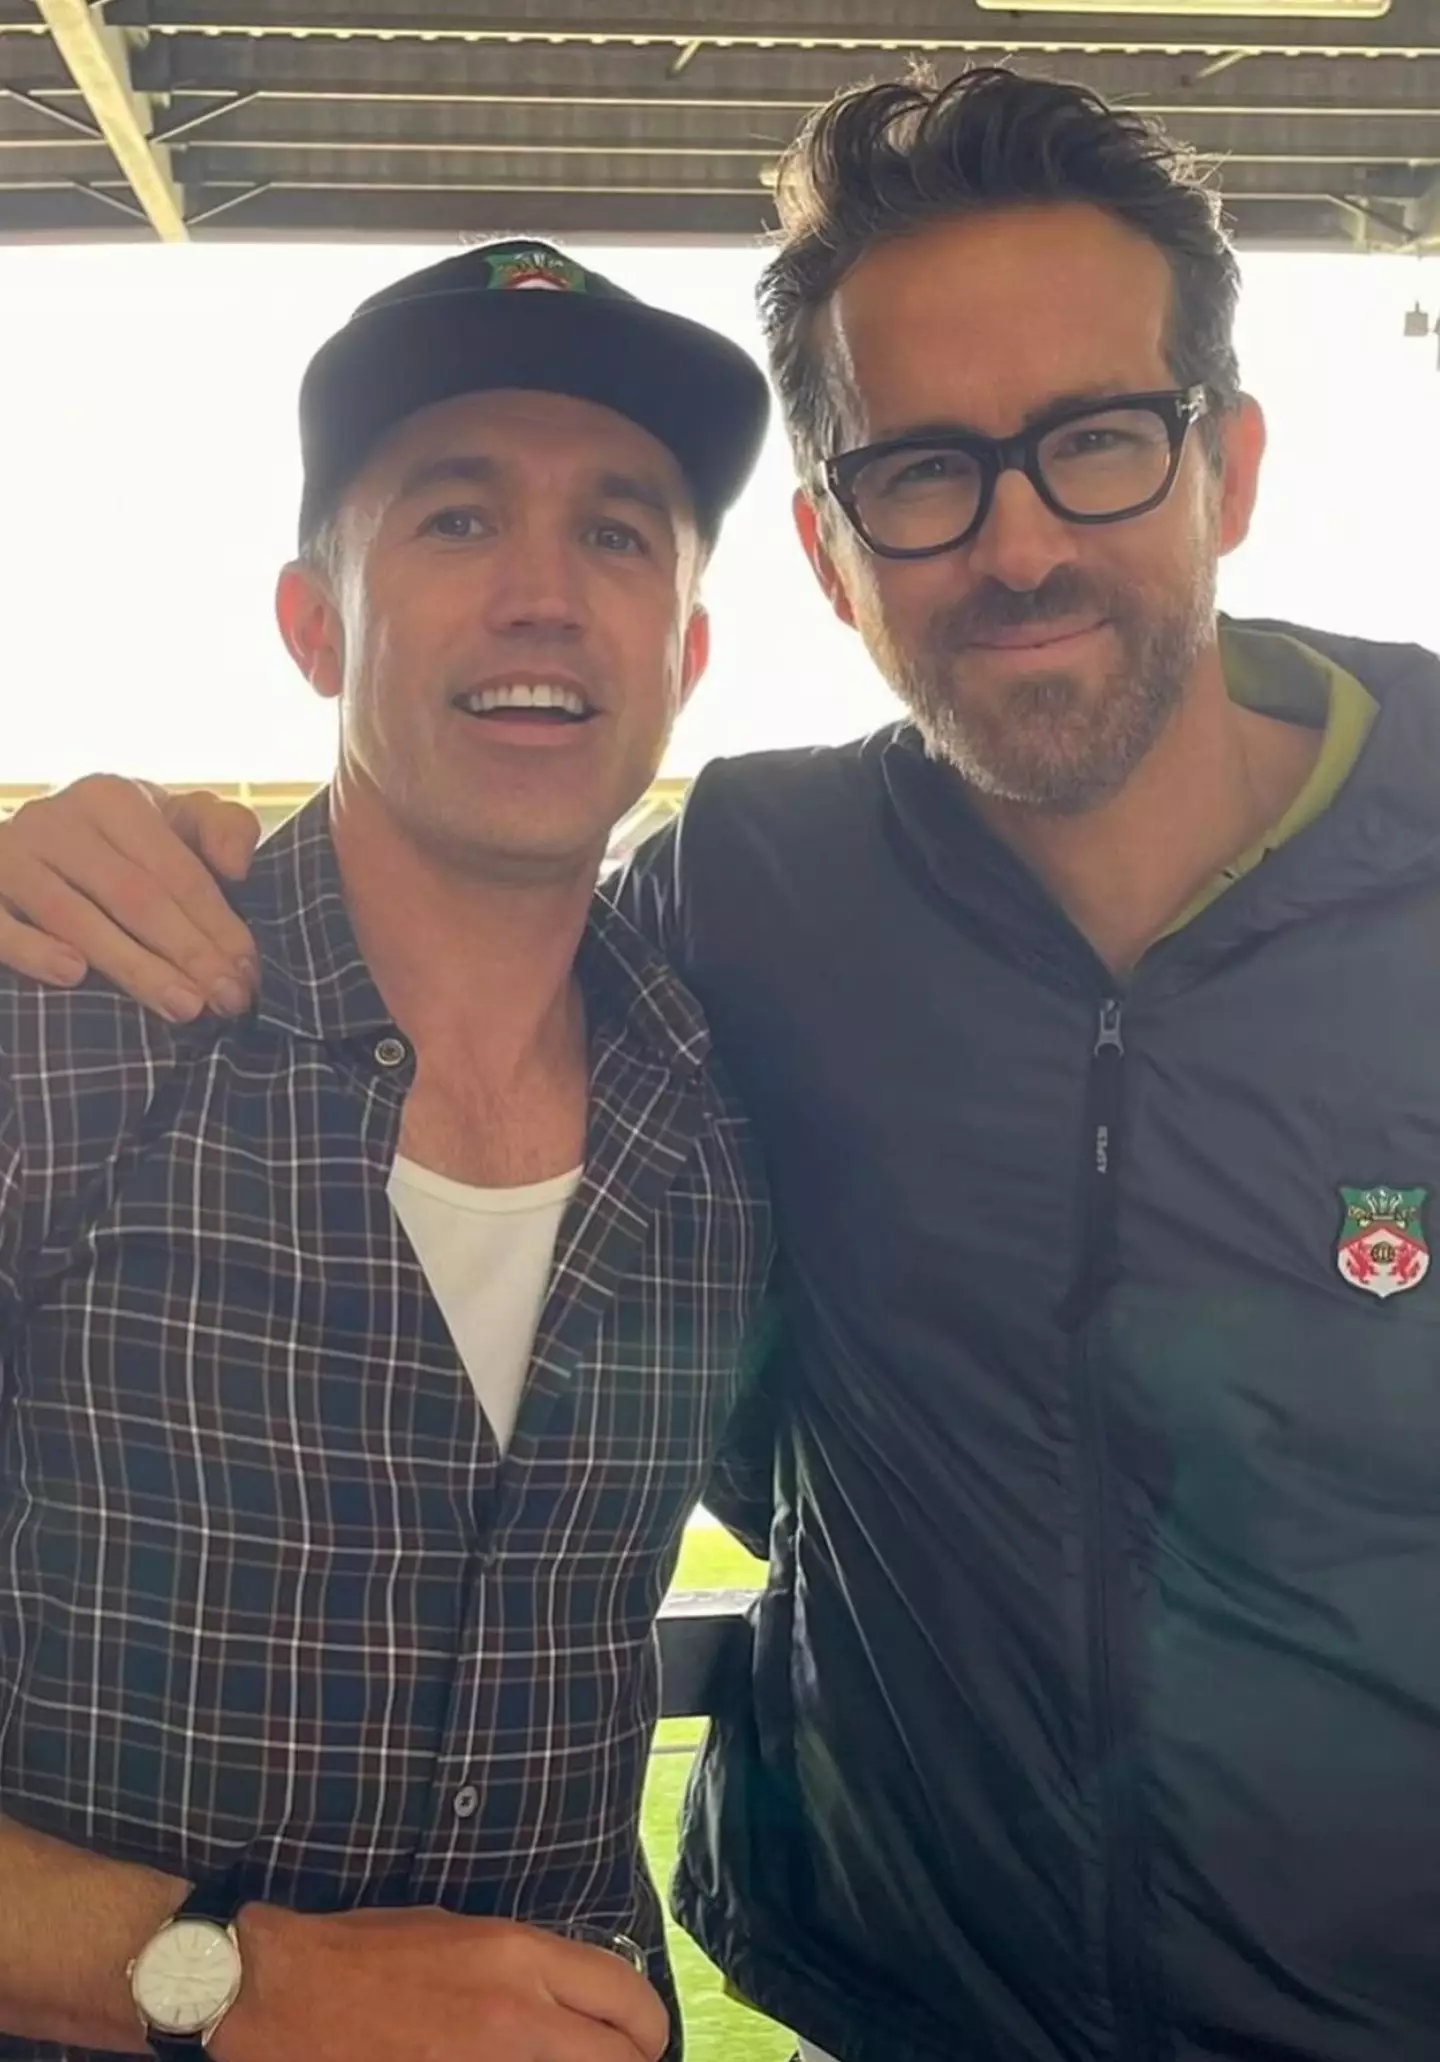 The actor shared a snap of him and Wrexham co-owner Ryan Reynolds.